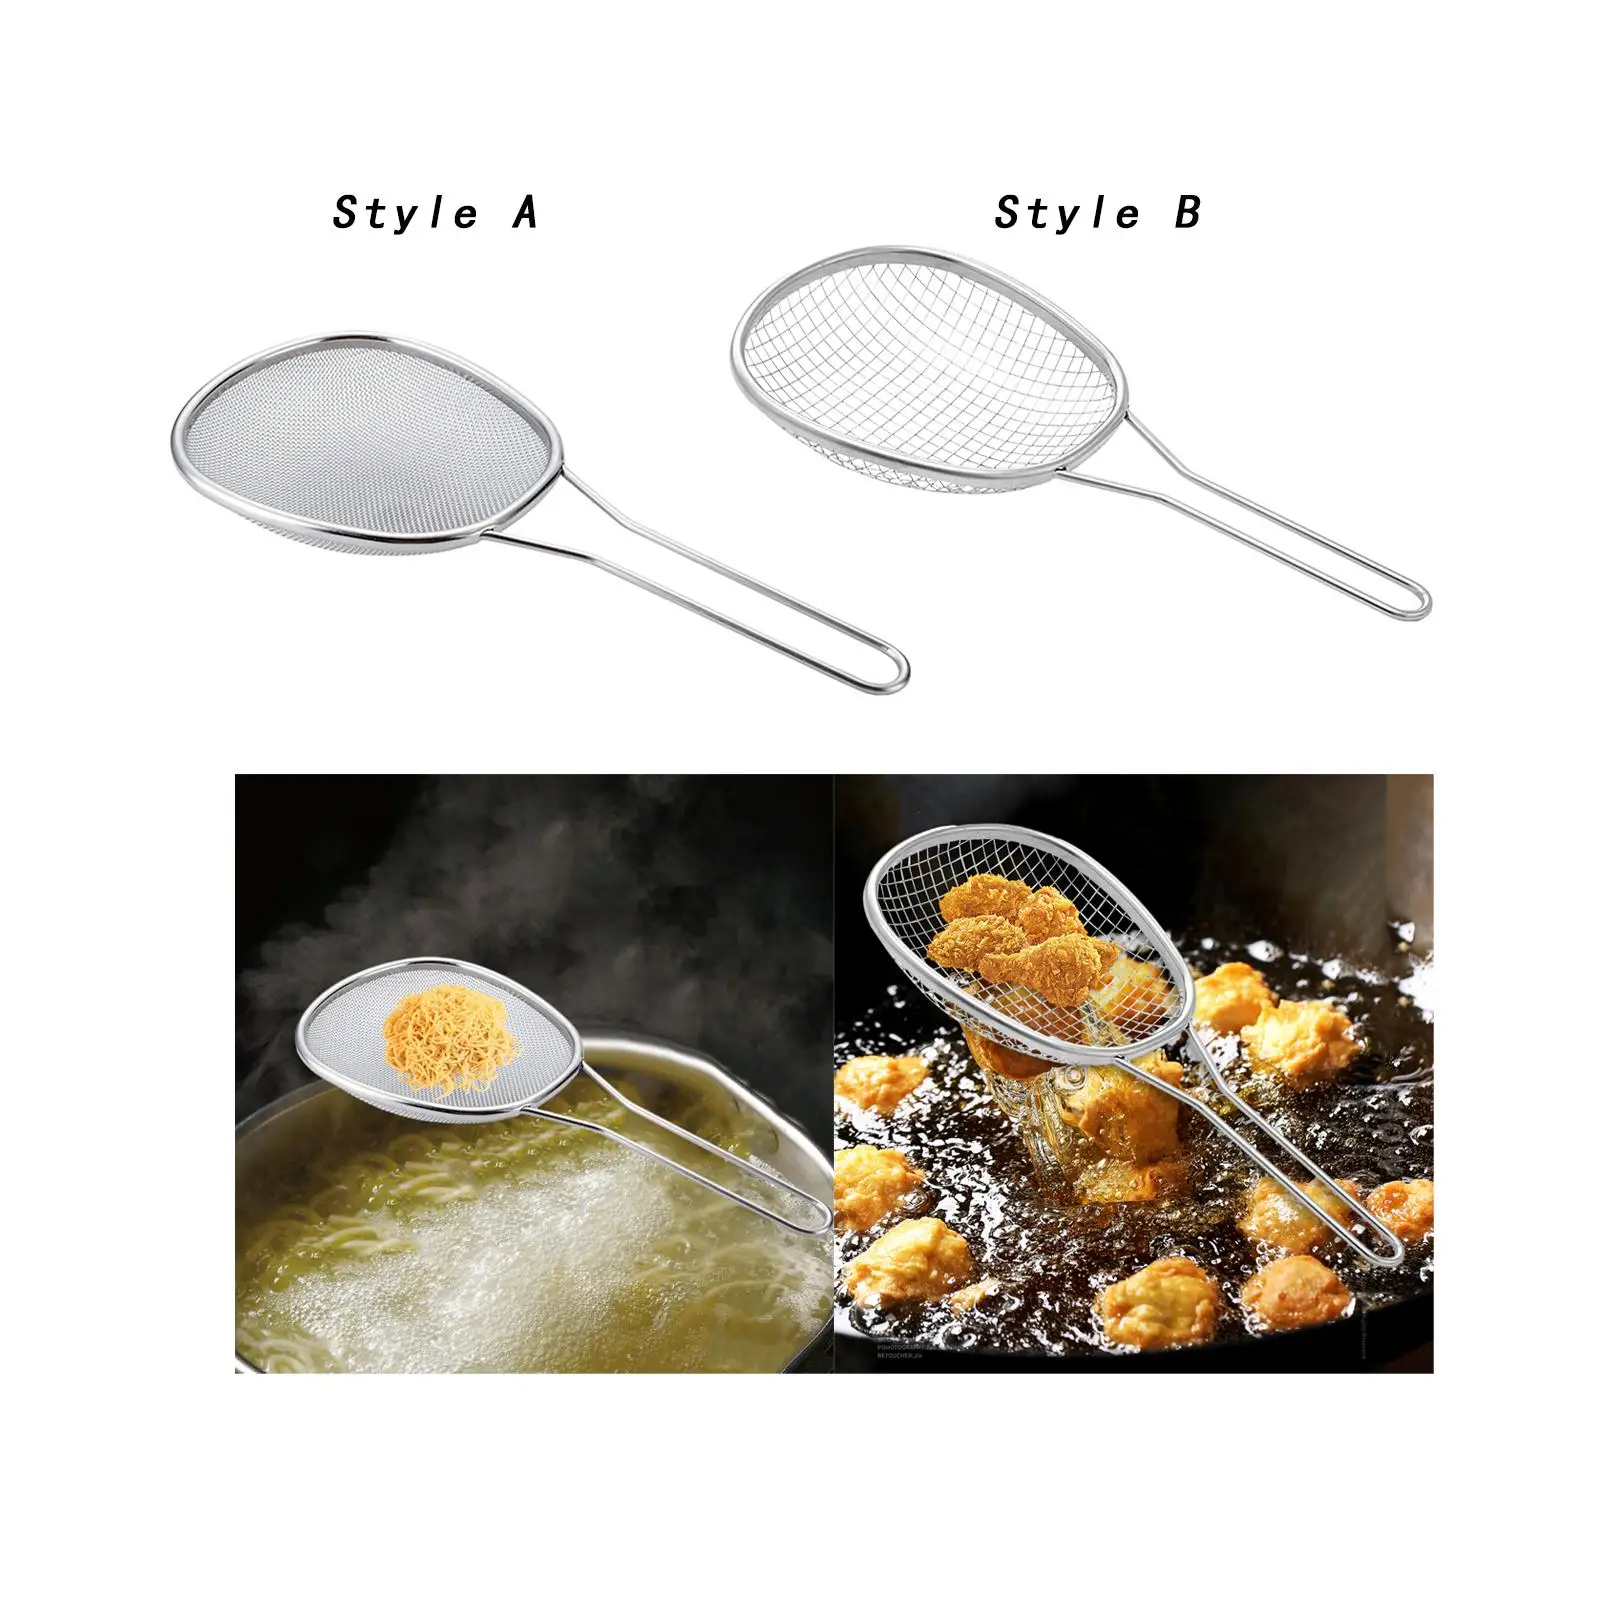 Stainless Steel Mesh Kitchen Strainer with Handle Tea Coffee Juice Strainer for Tea Powdered Sugar Sifting Flour Juice Vegetable